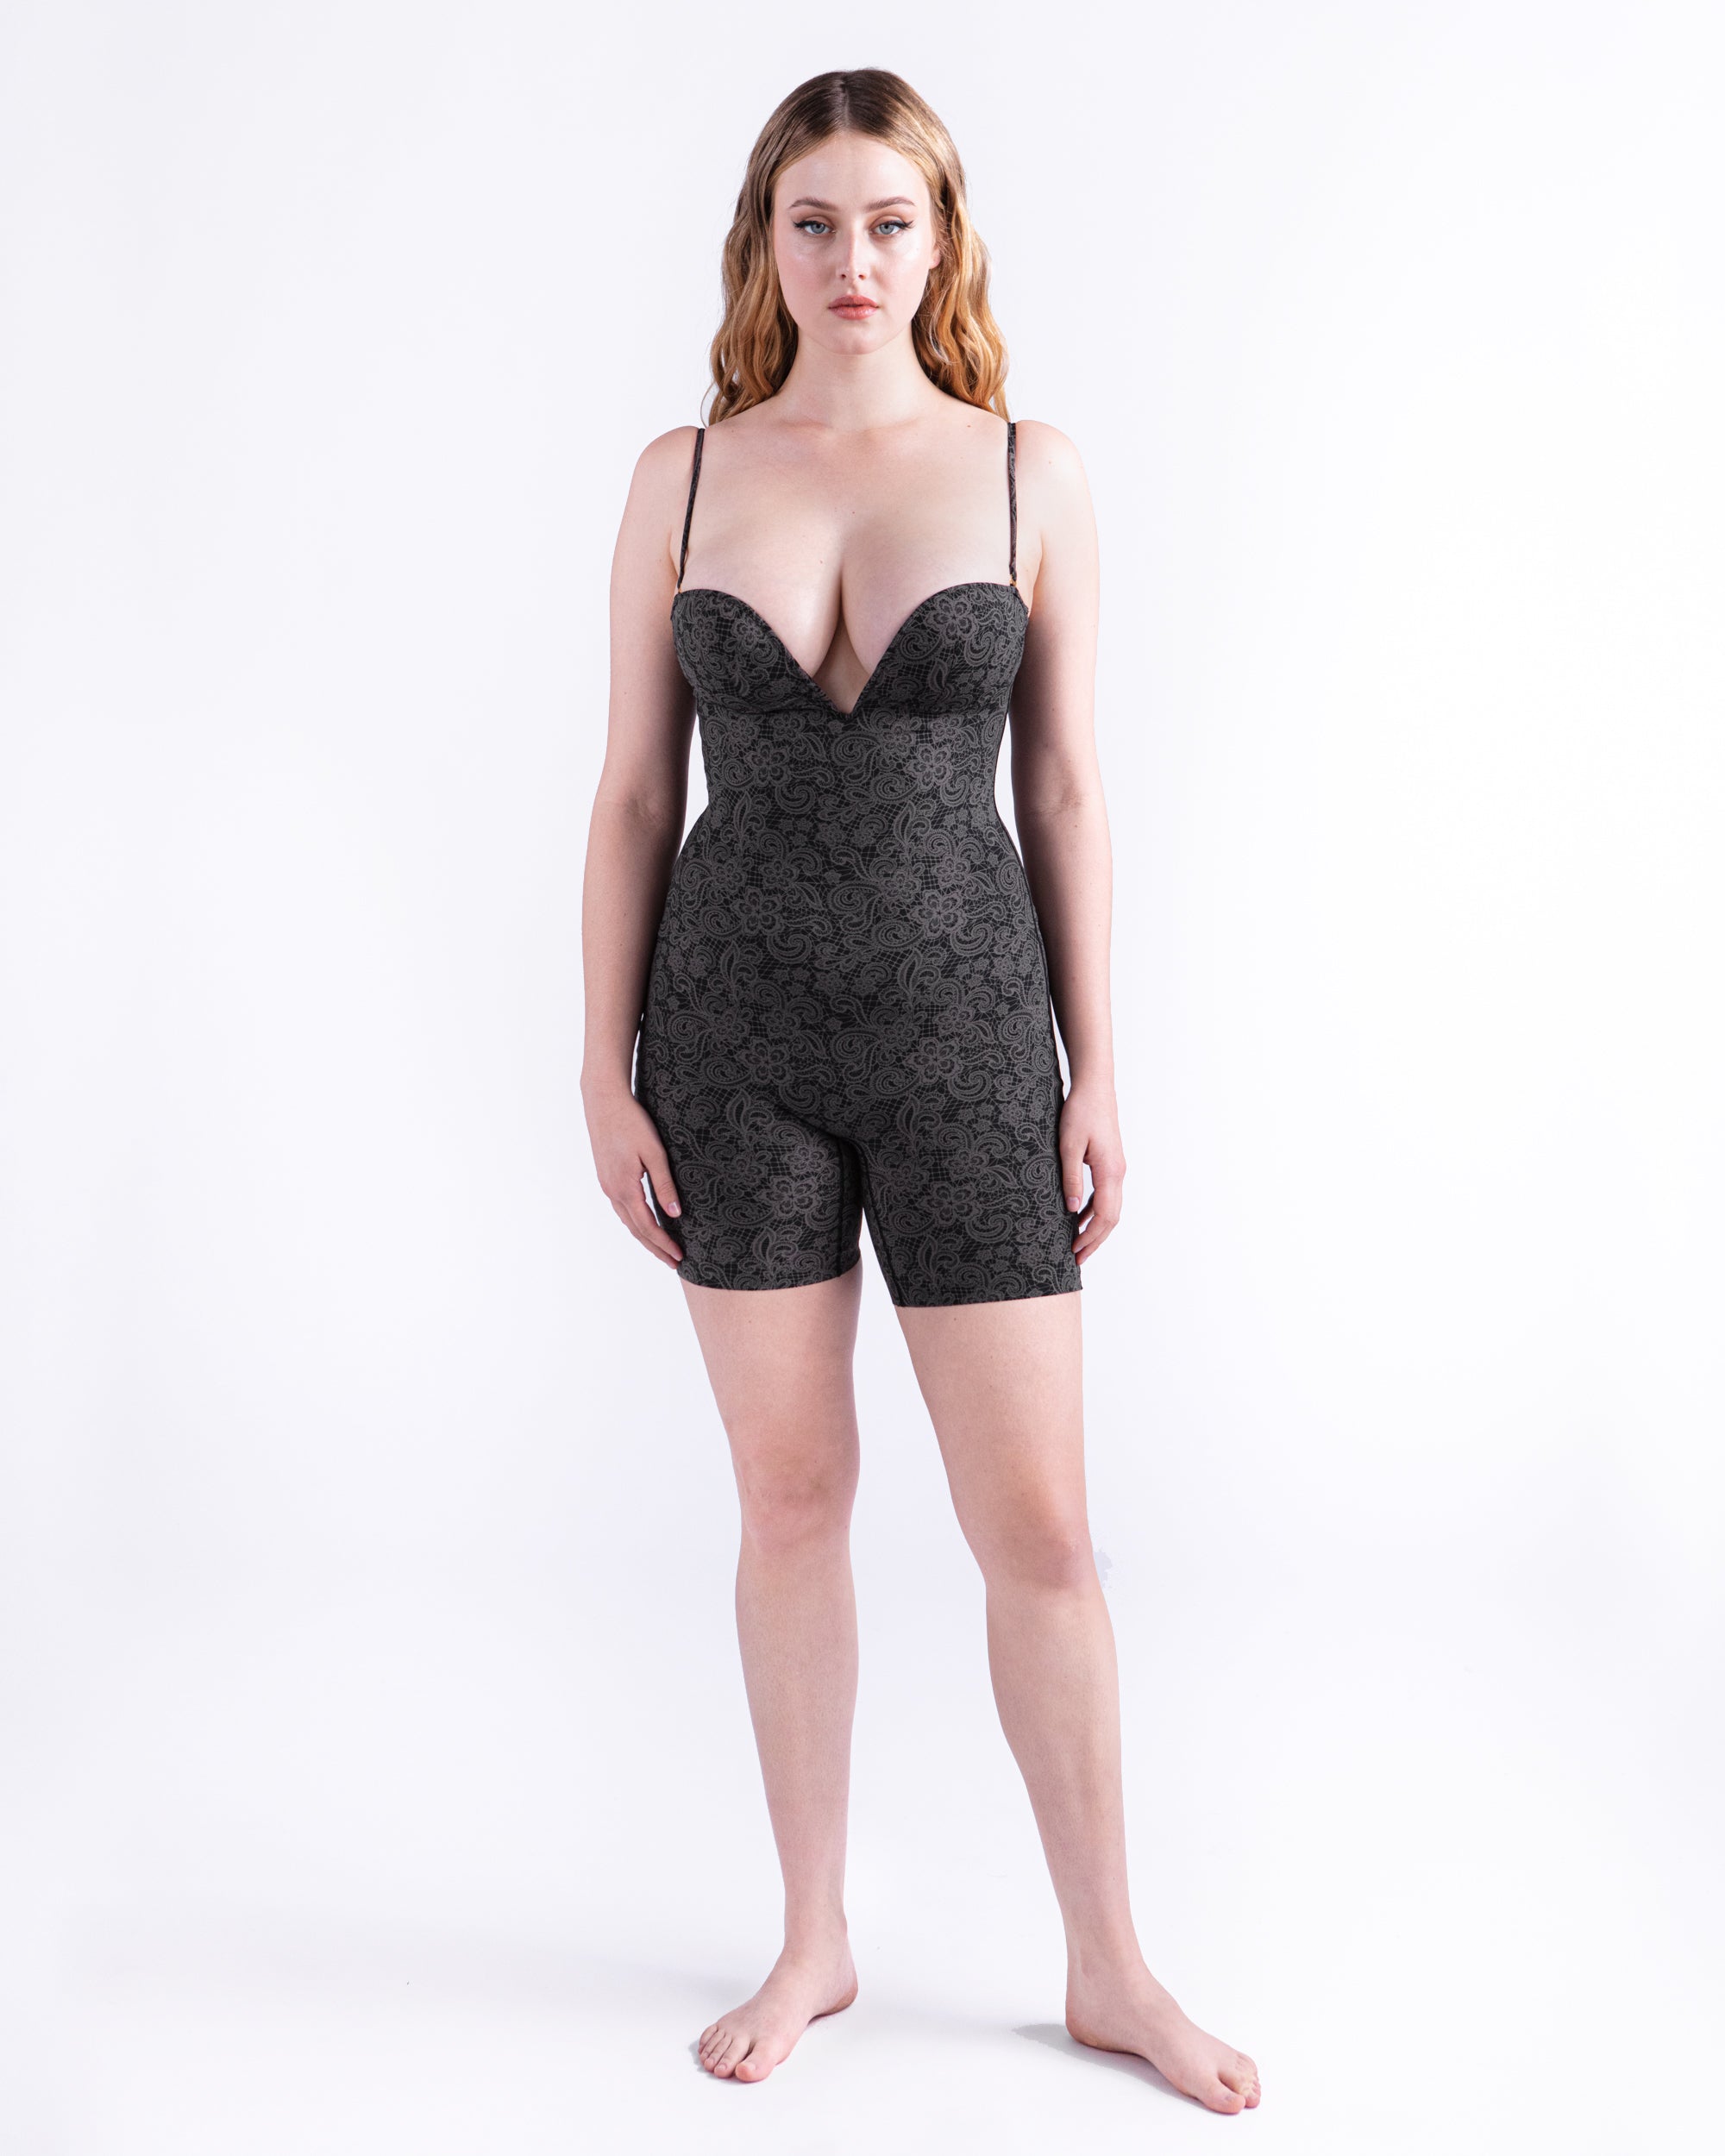 Mid-Thigh PowerSuit in Black